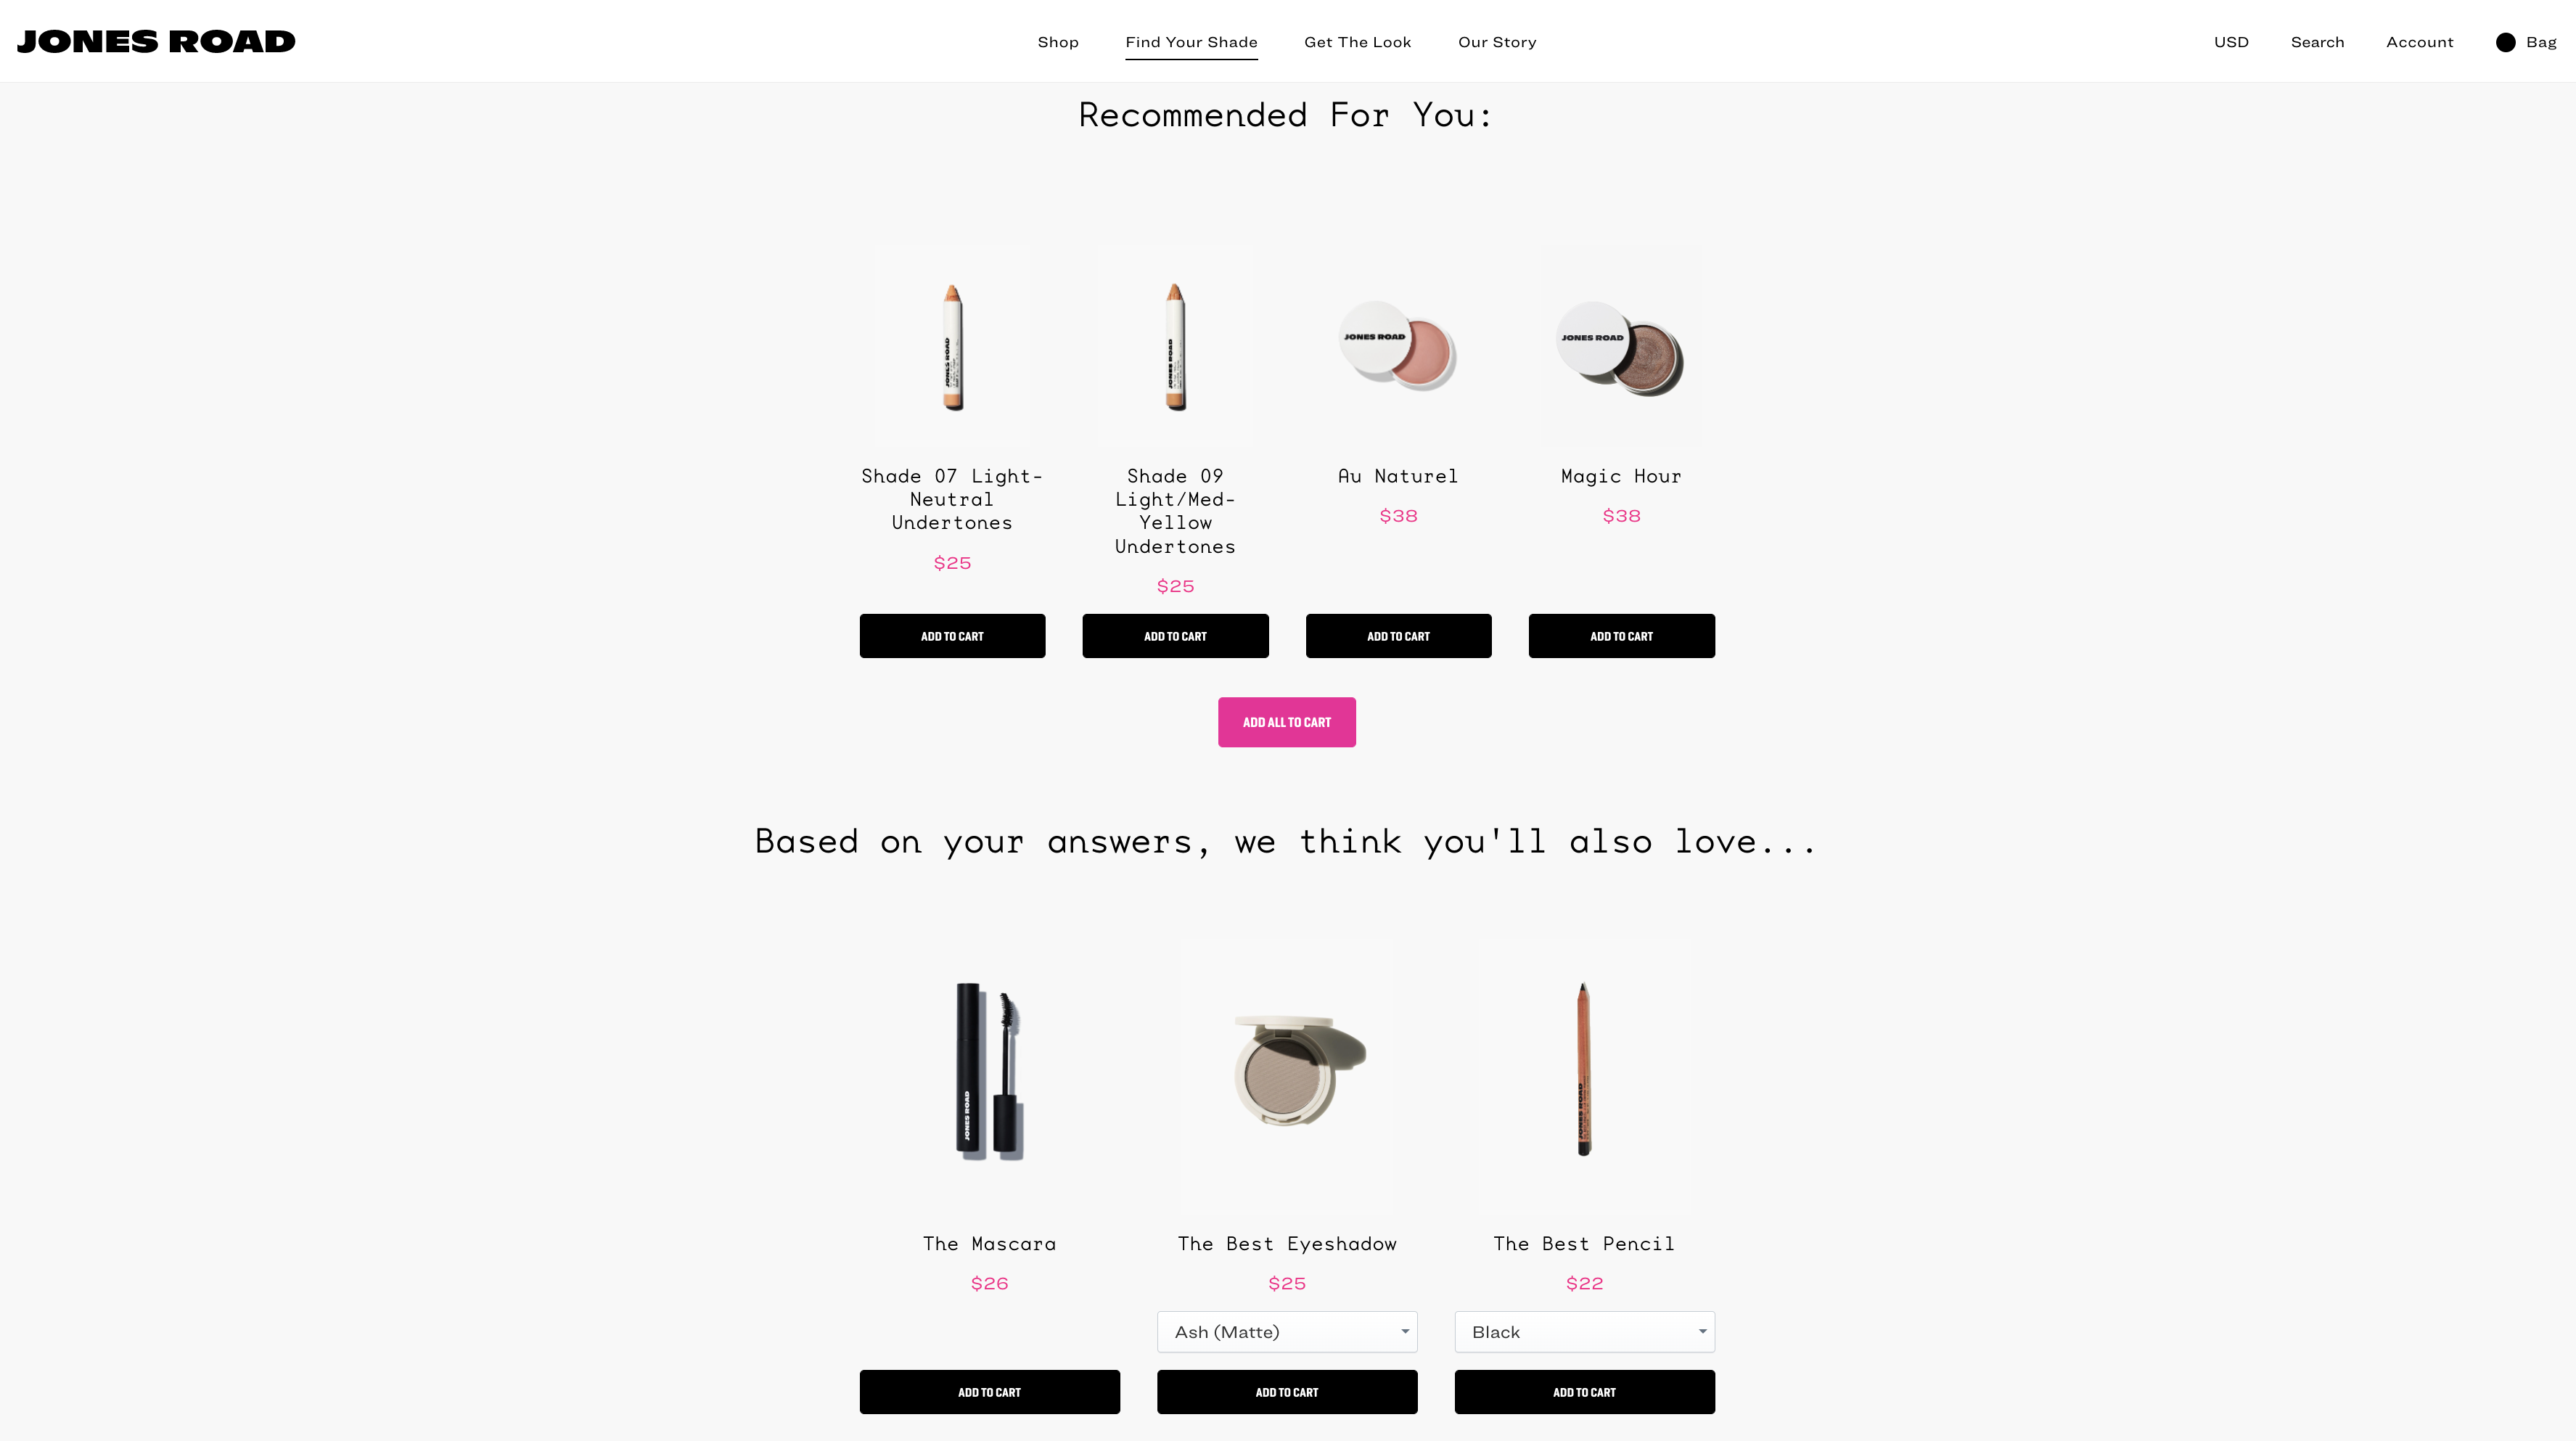 Jones Road Beauty product recommendation quiz results page example